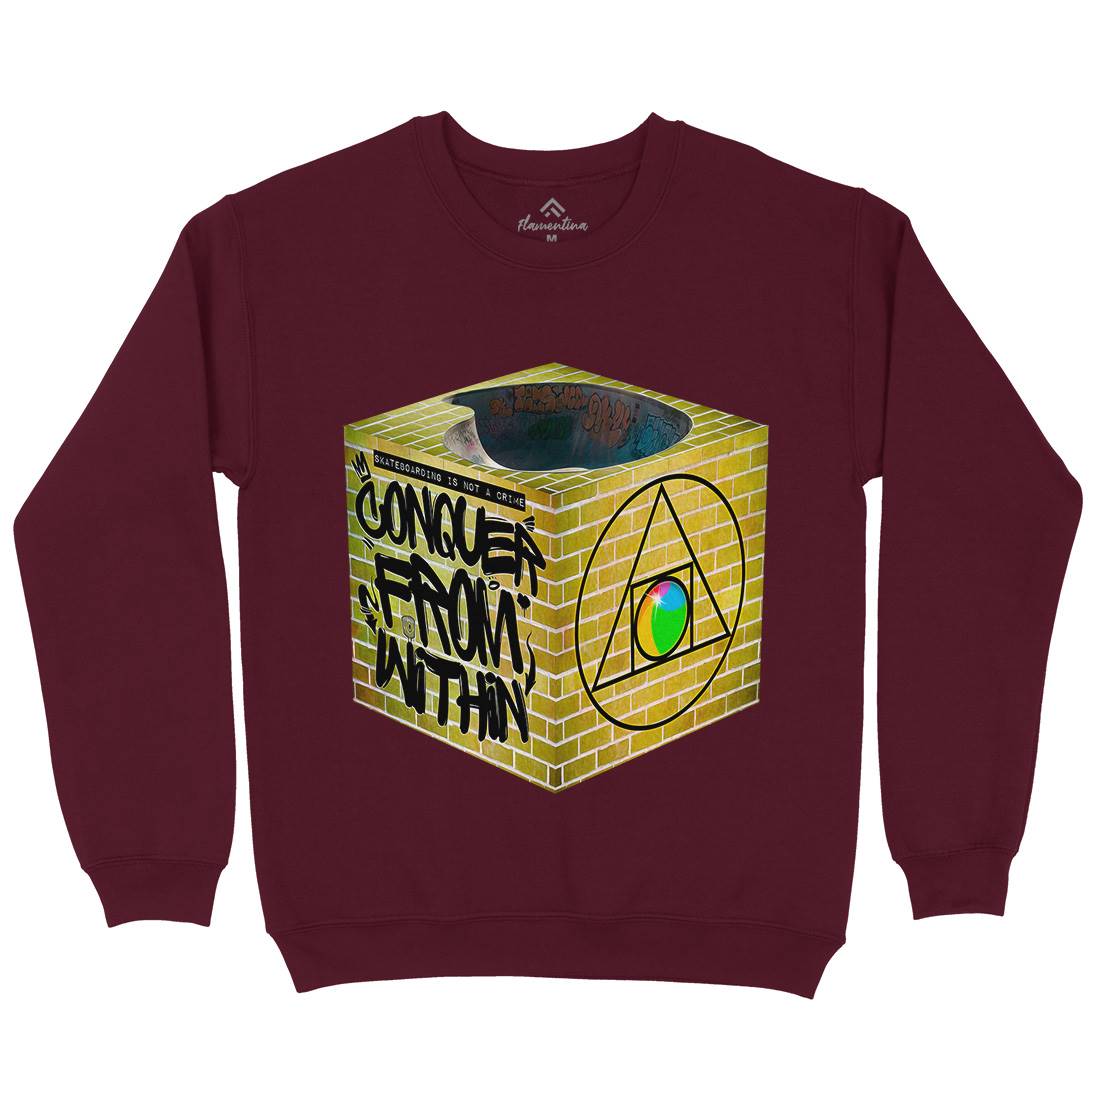 From Within Kids Crew Neck Sweatshirt Skate A838